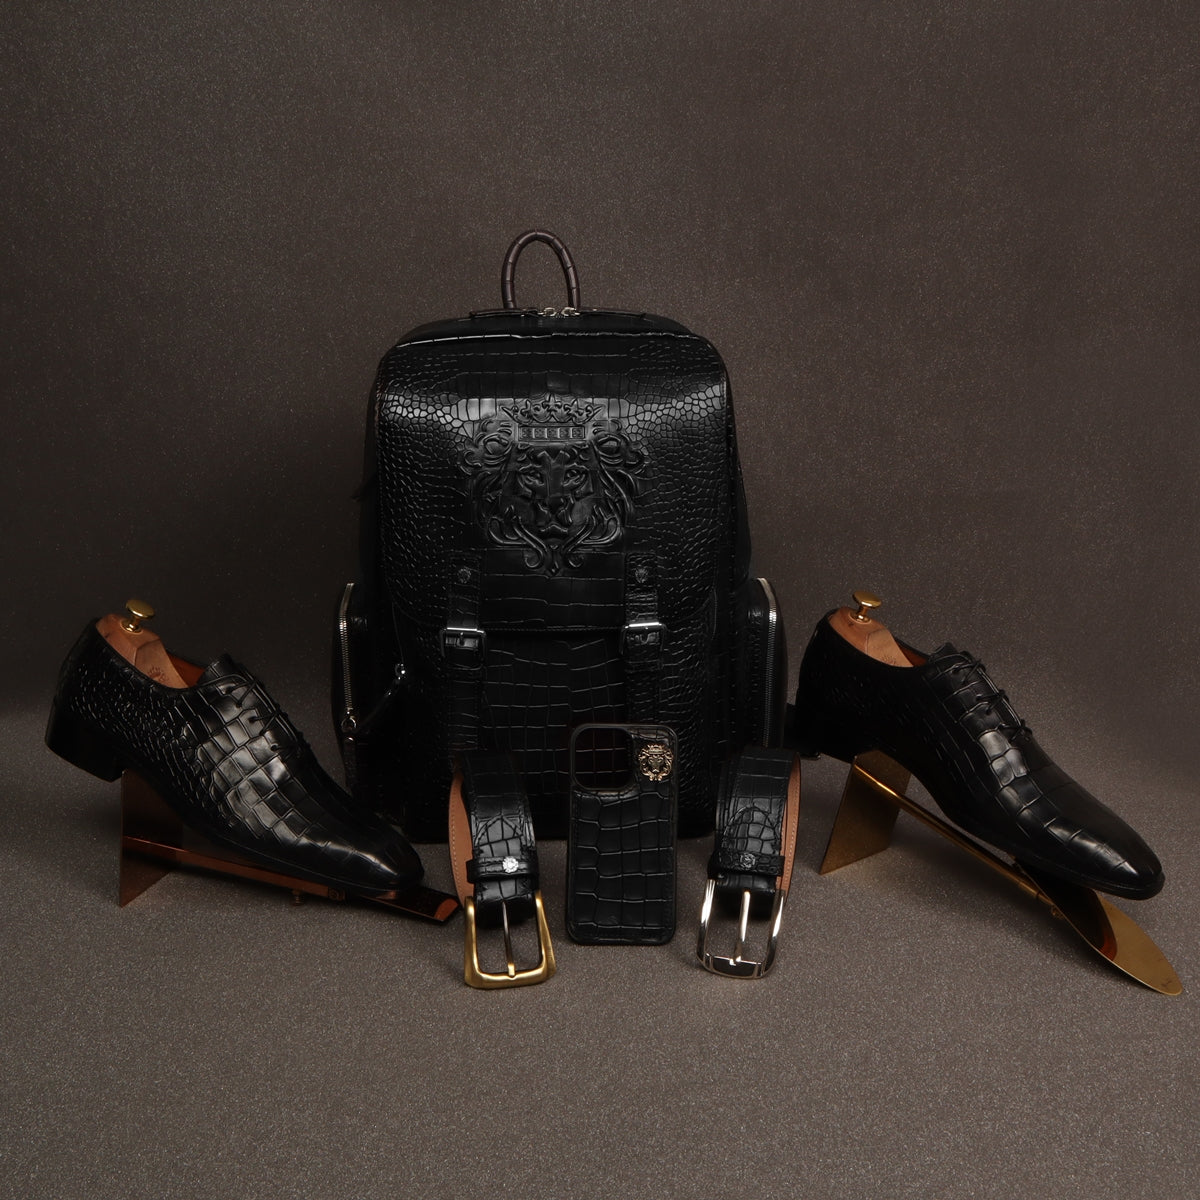 Black Leather Formal Travel Combo In Croco Textured (Footwear, Bag, accessory) 41/7 / 14 / 38